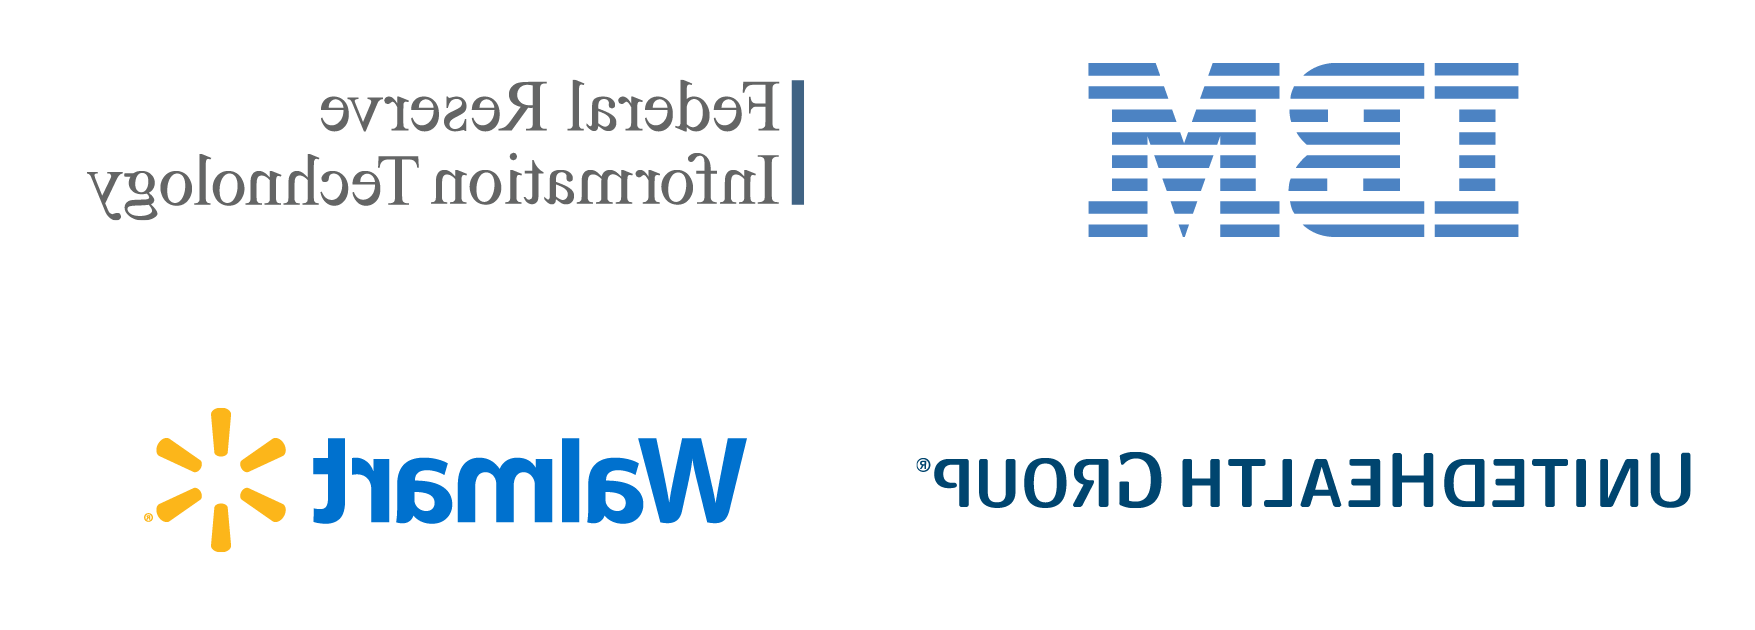 Logos of 信息rmation Systems career destinations: IBM, Federal Reserve 信息rmation Technology, United Health Group, 和沃尔玛